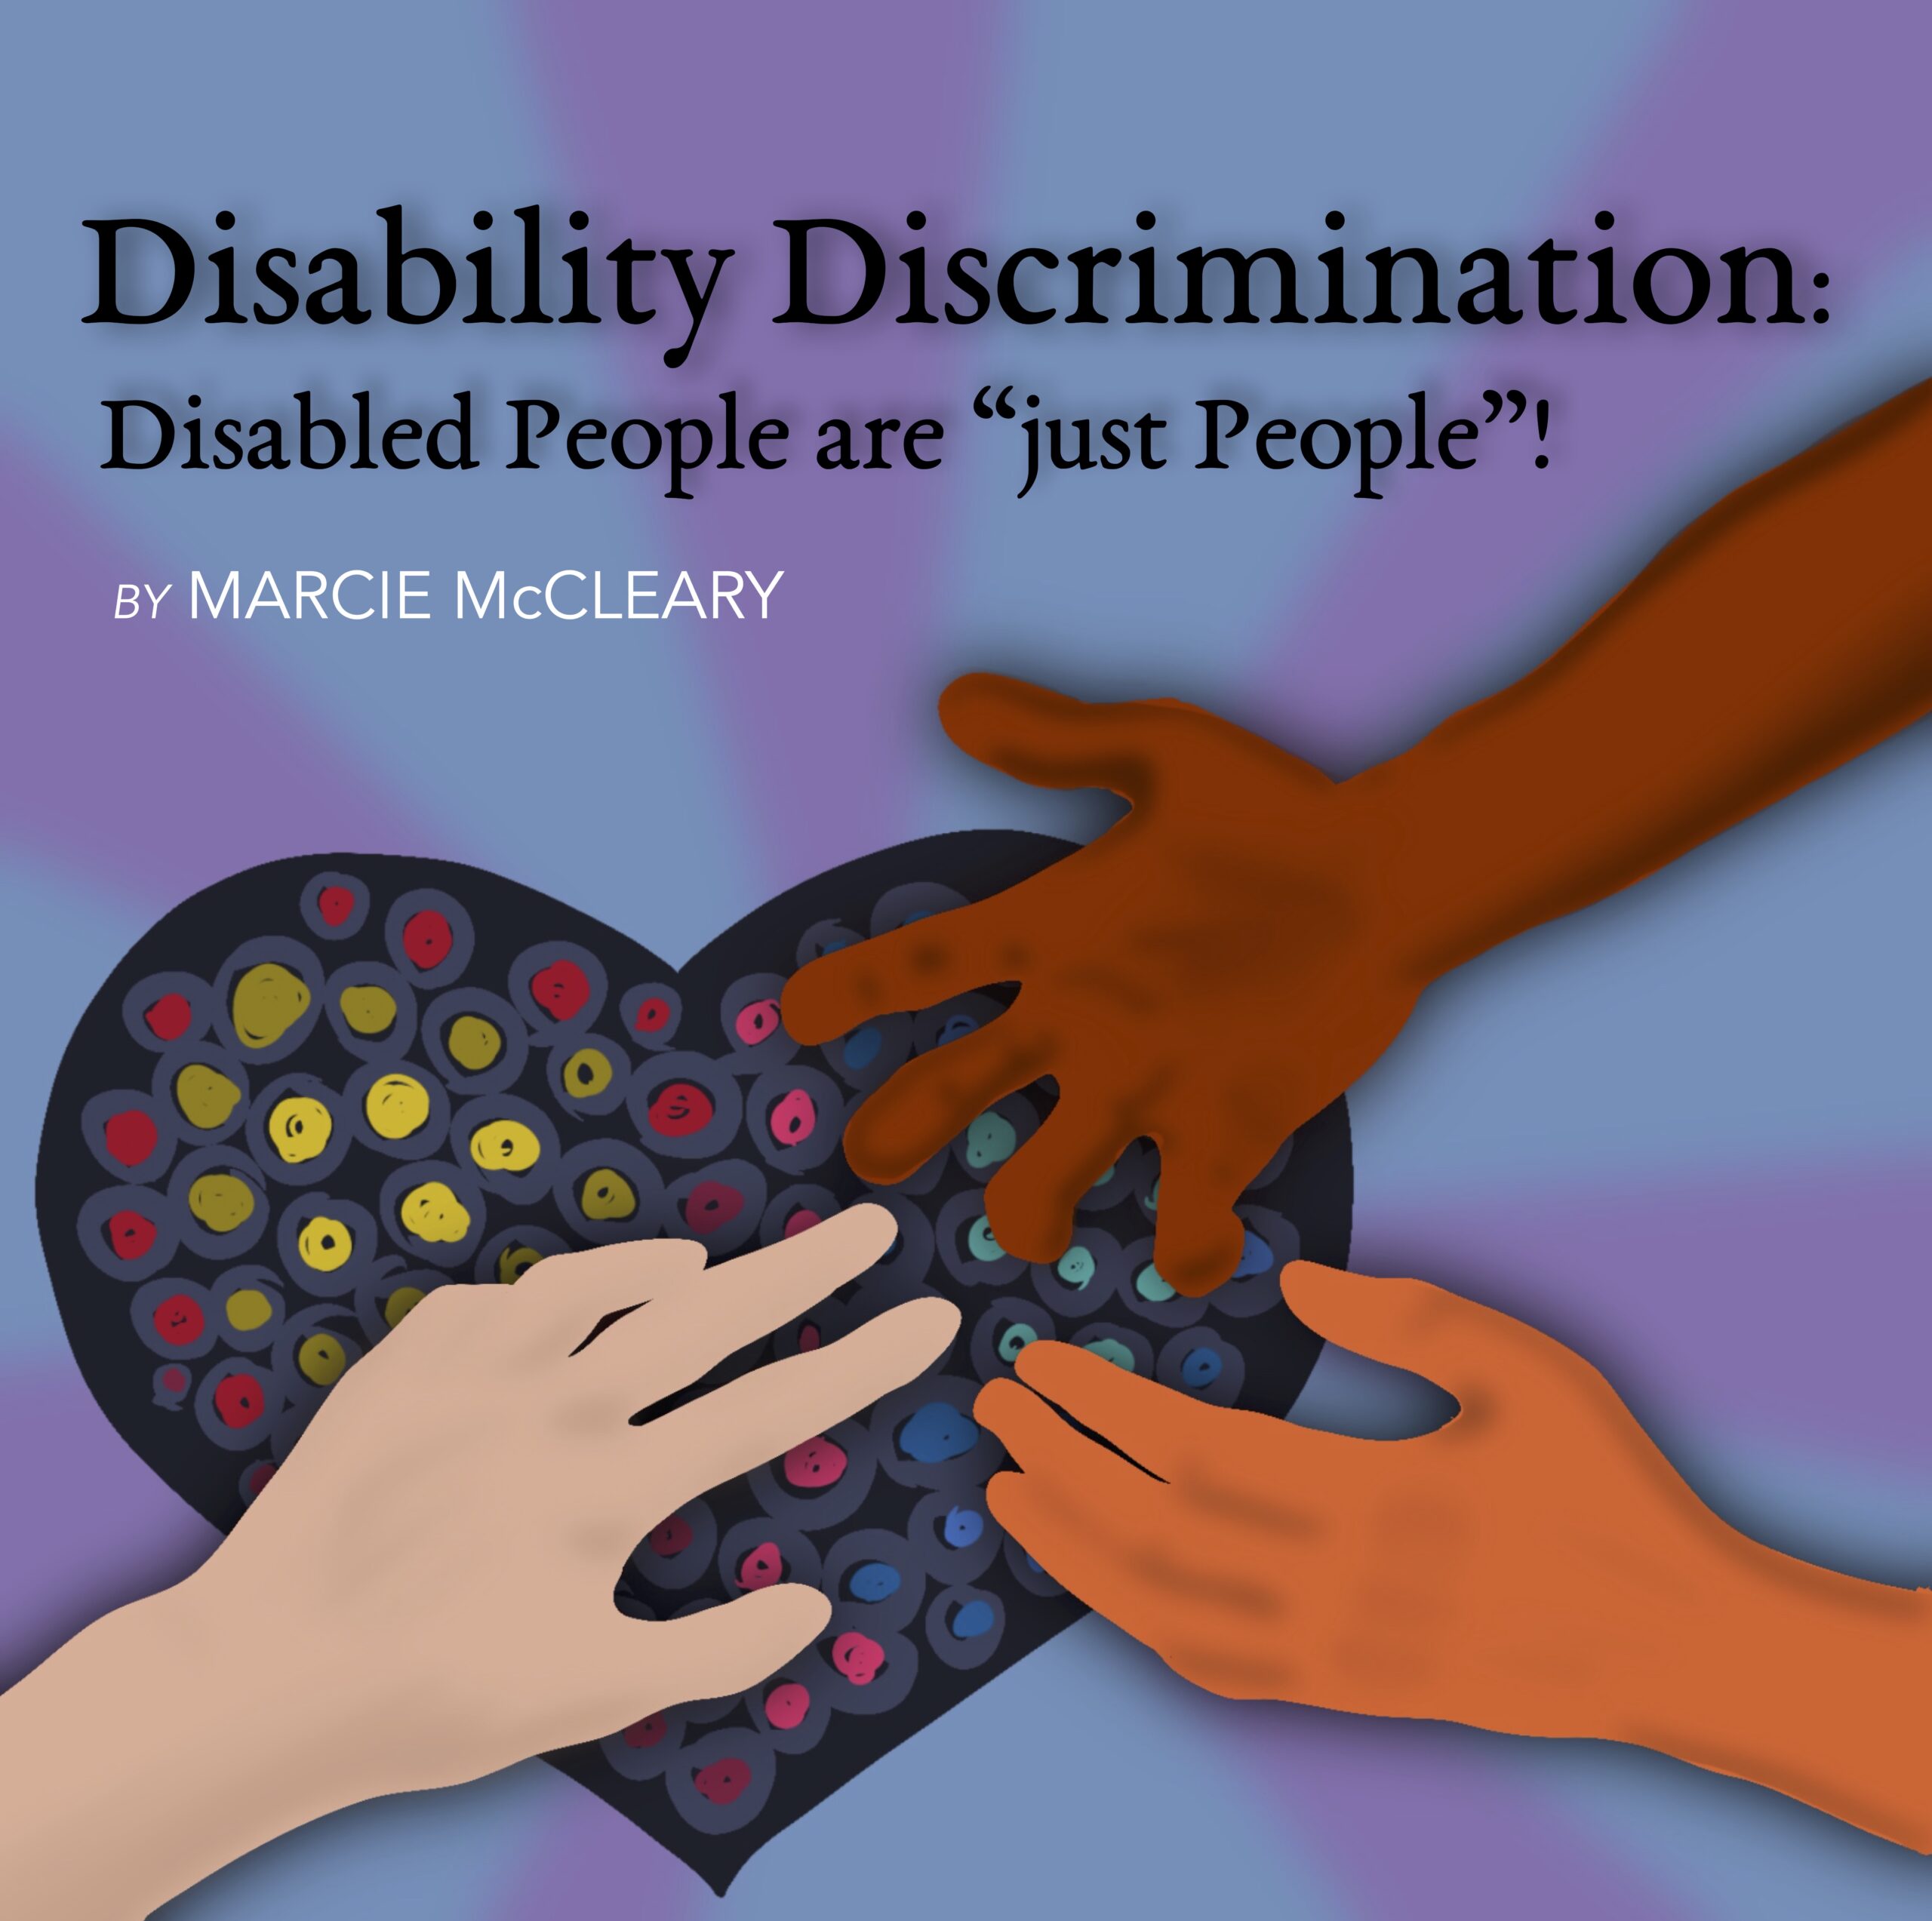 Disability Discrimination: Disabled People are “just People”!